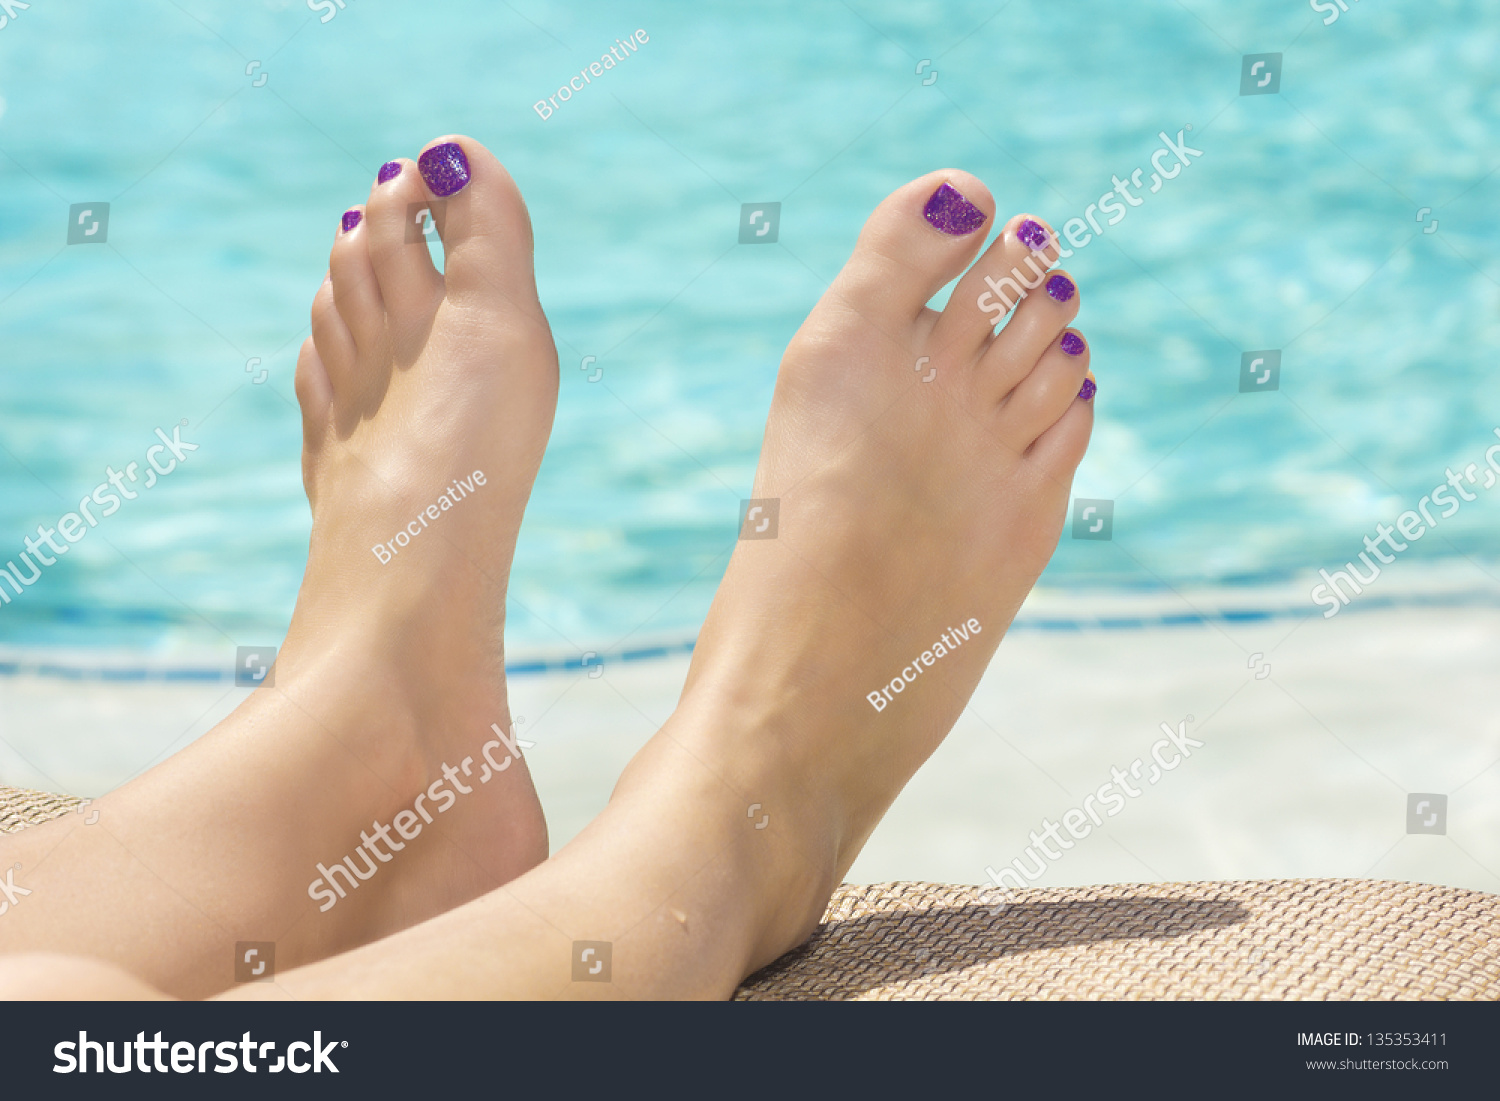 Feet models with sexy Playboy: Barefoot